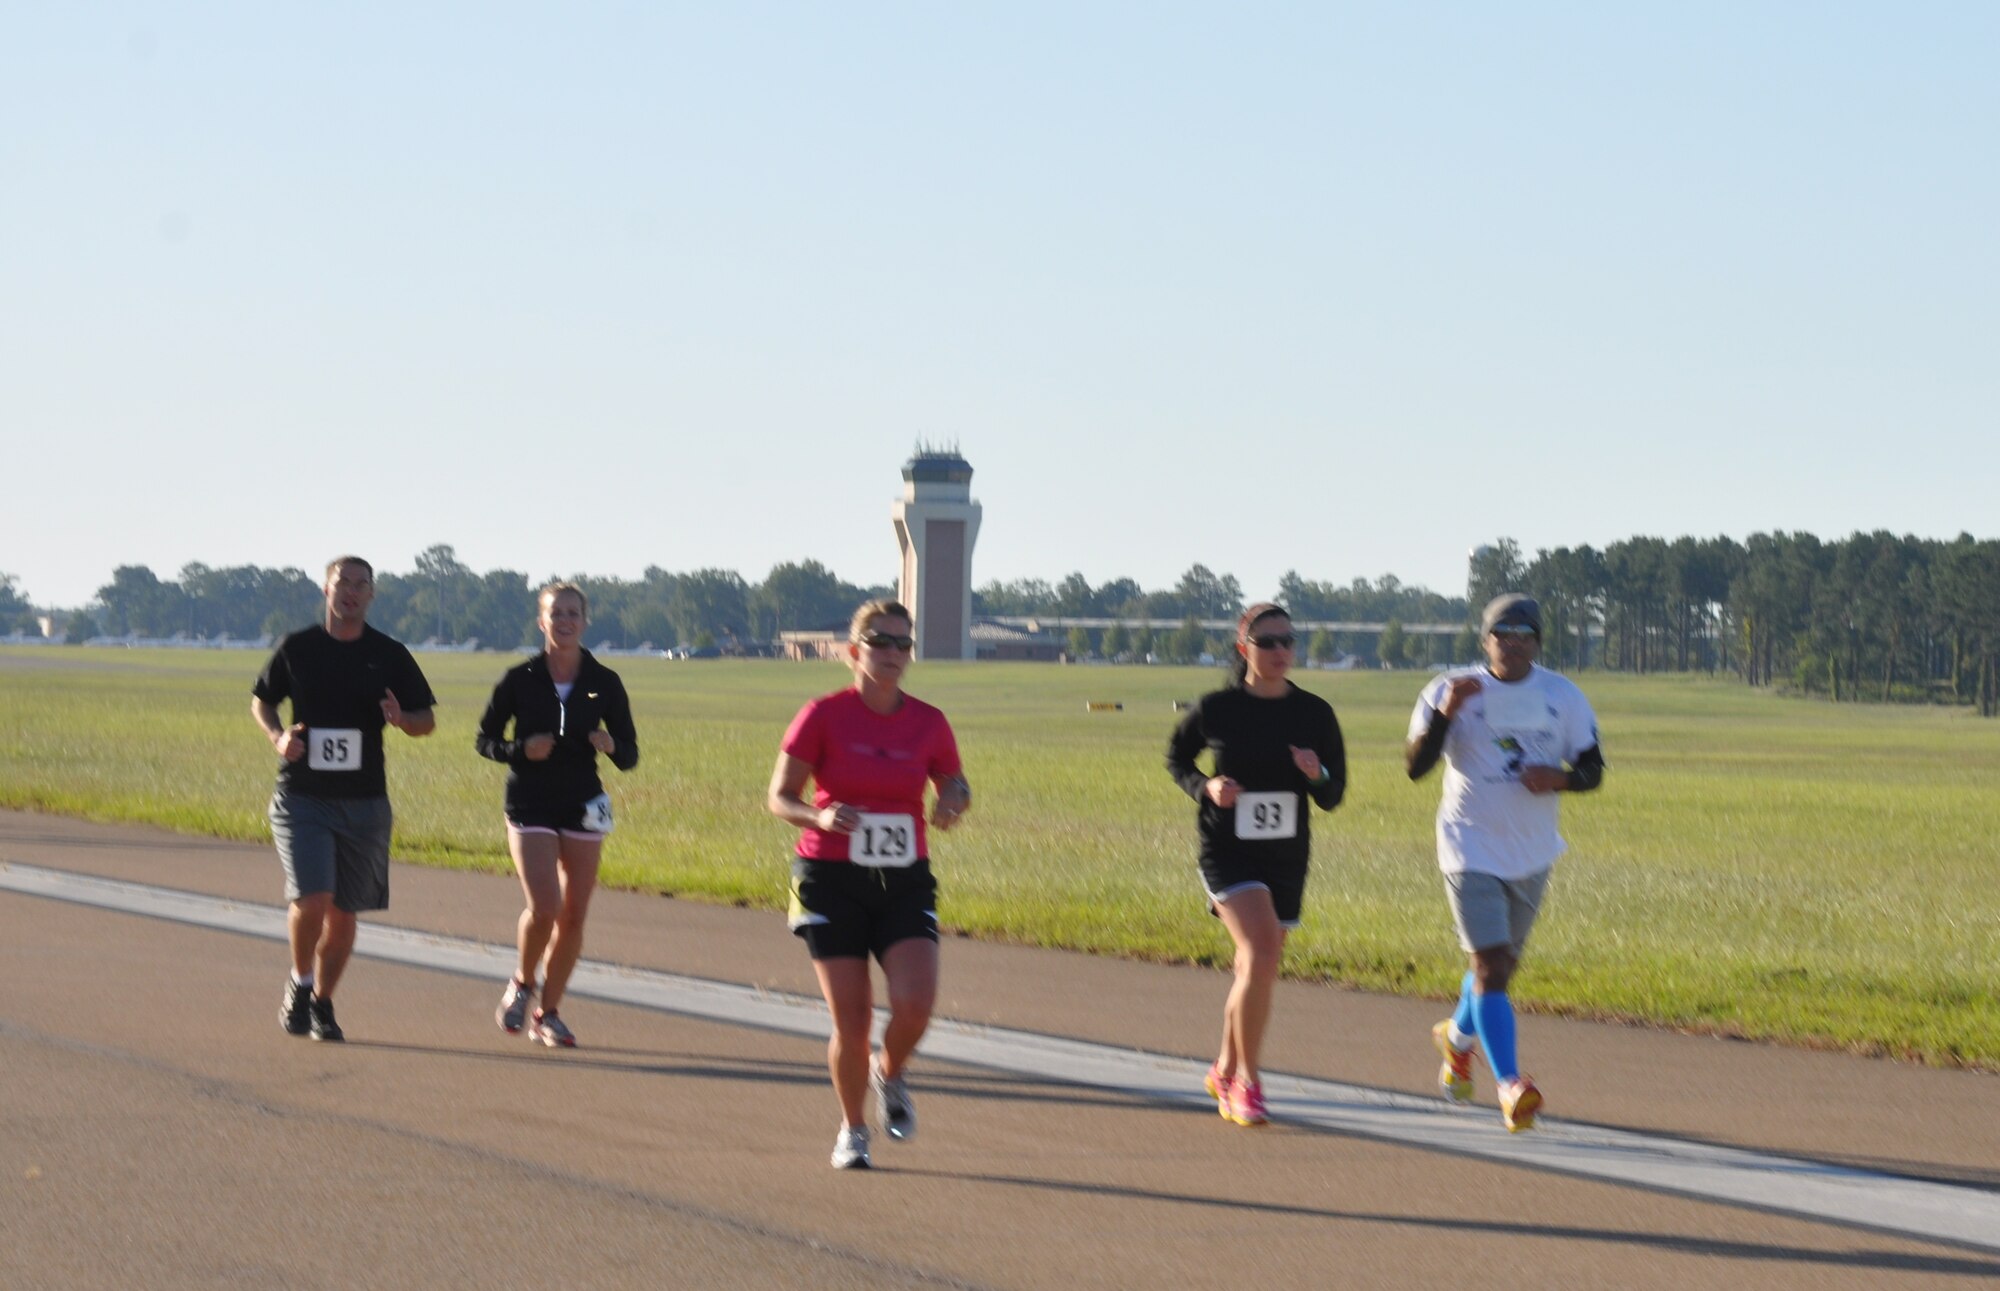 Participants of the BLAZE race on Oct. 1 run down the flightline as part of the course. Sixty-eight Team BLAZE members participated overall. Top 5k Male: Justin Lane. 5k Female: Elizabeth Poeppleman. Top 10k Male: Michael Fleharty. Top 10k Female: Megan Olsen. (U.S. Air Force photo/2nd Lt. Brionna Ruff)